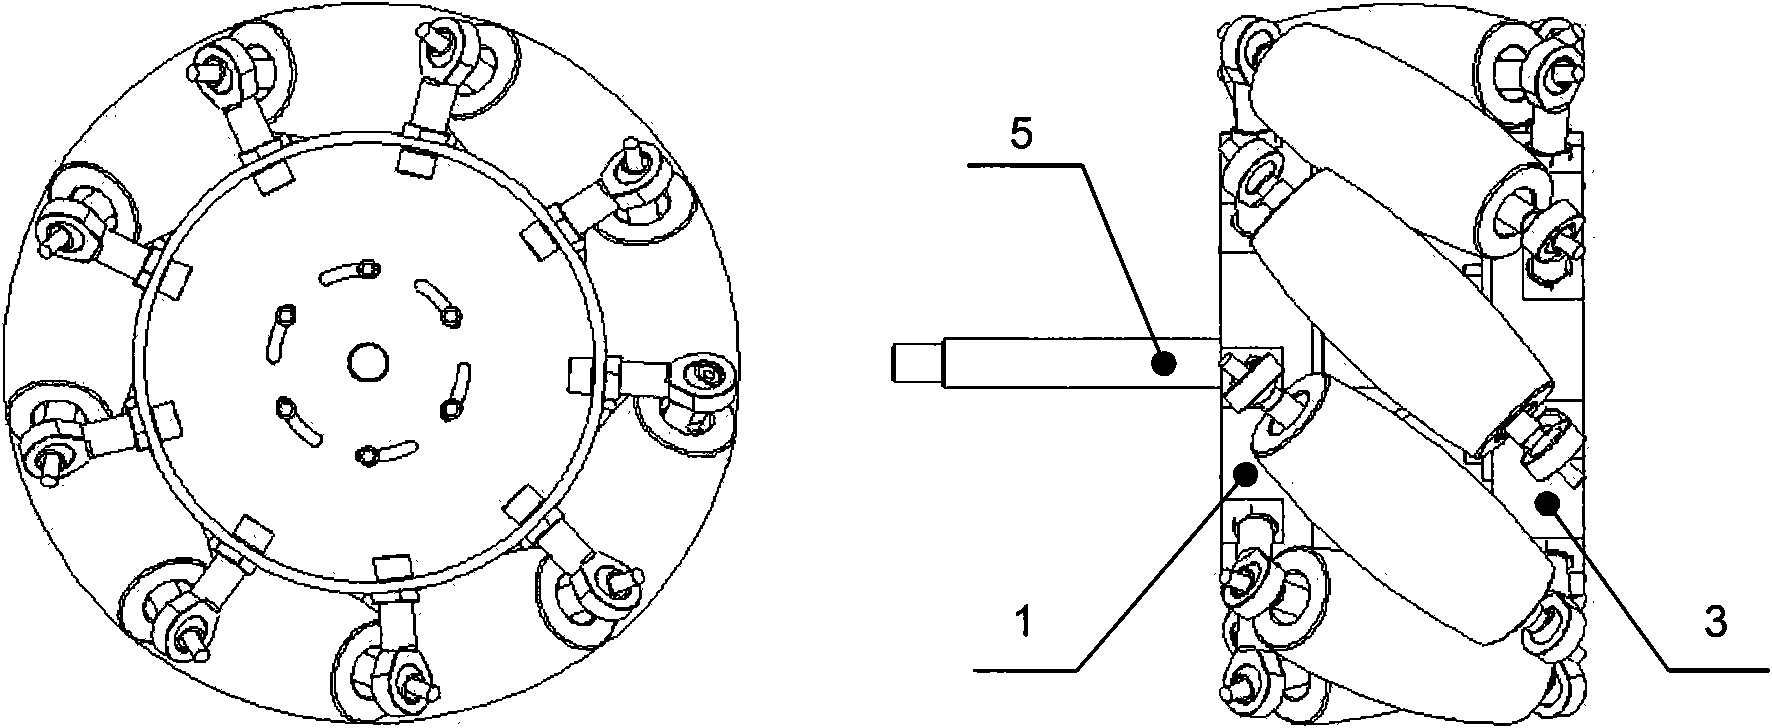 Omnidirectional wheel with simplified manufacturing technique